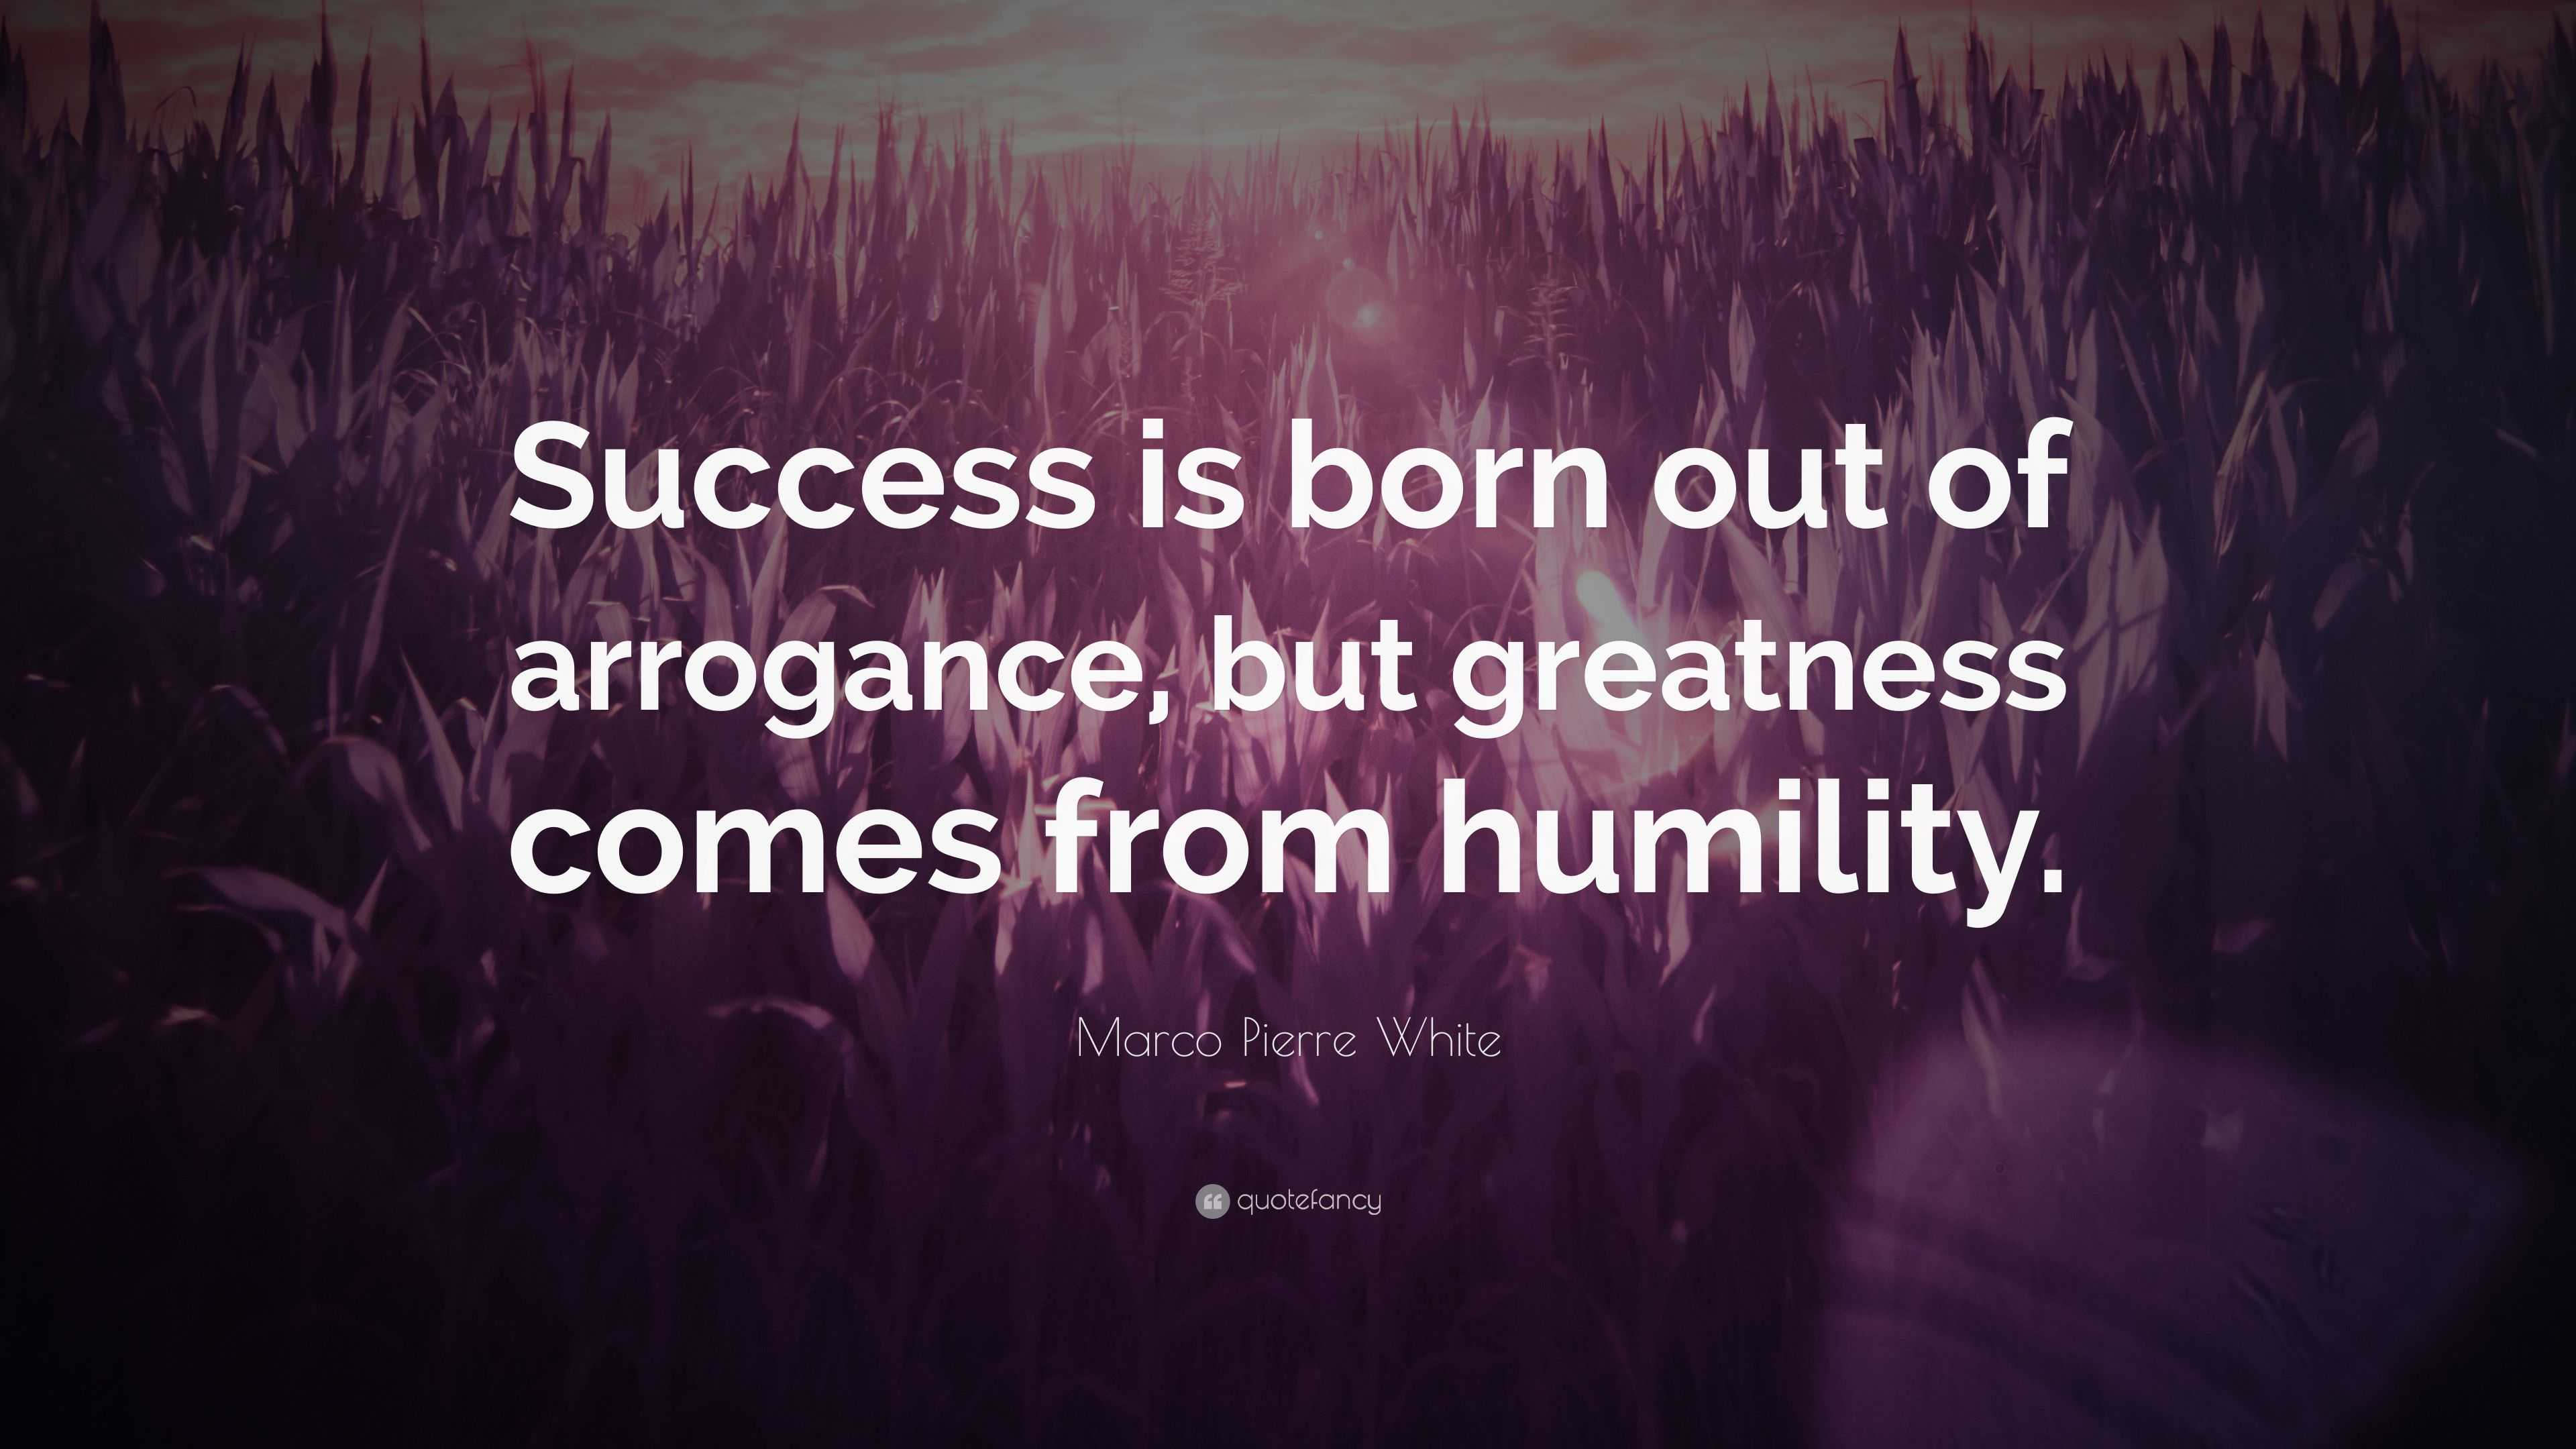 Marco Pierre White Quote: “Success is born out of arrogance, but ...